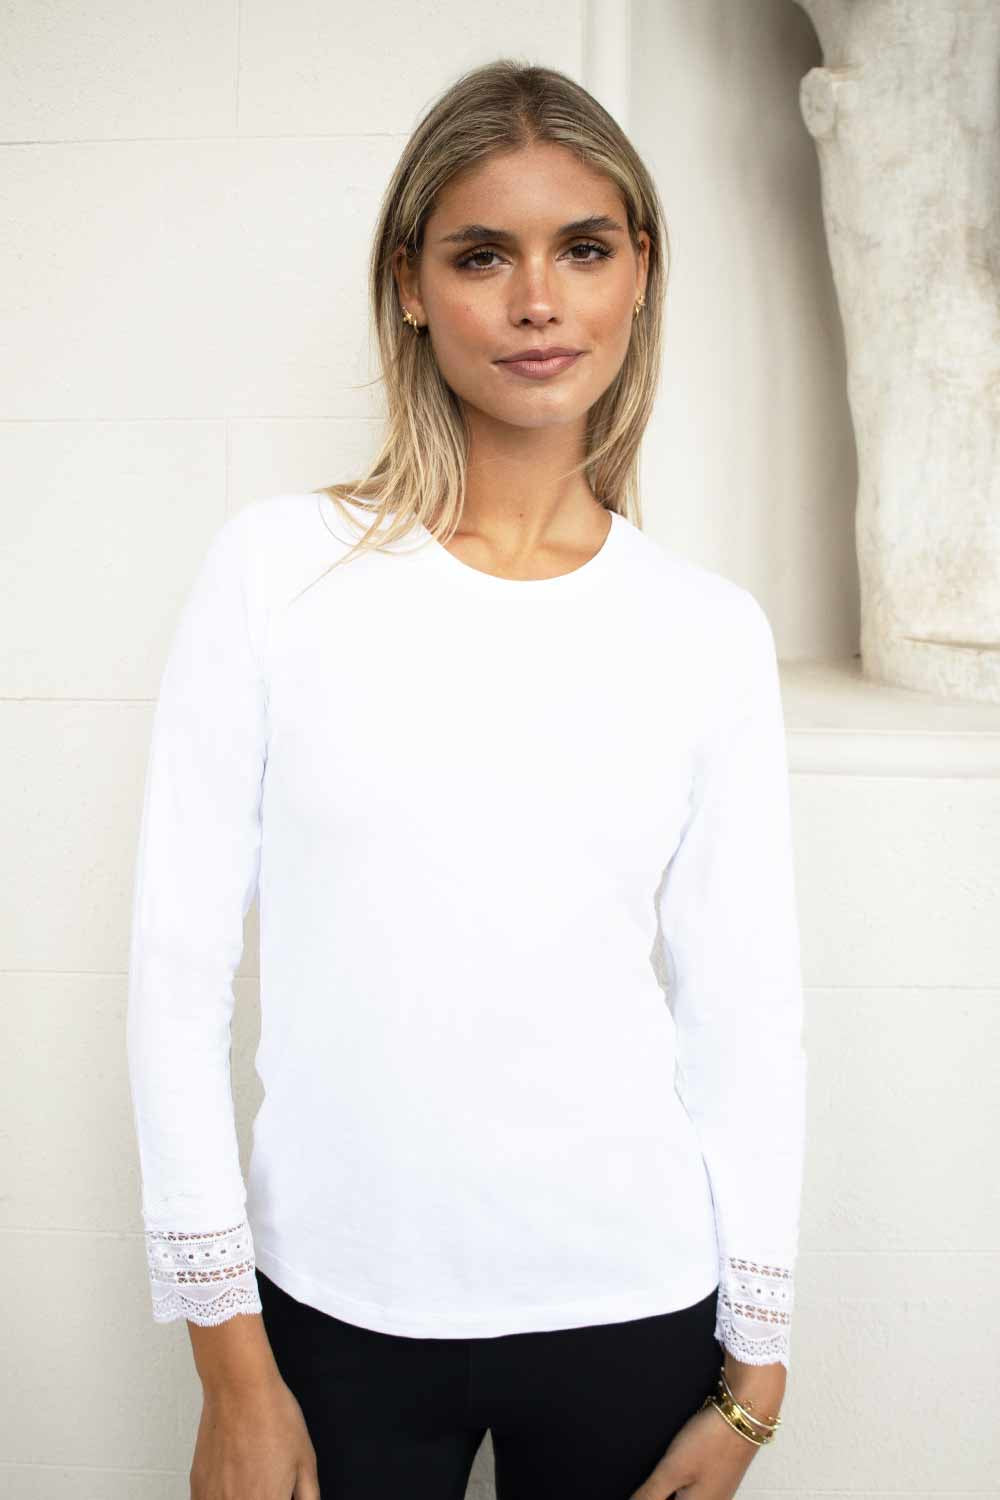 As a fashion connoisseur, you understand the power of a well-curated wardrobe. And now, you have the opportunity to upgrade your fashion game with the exquisite Evelin Brandt's No 2 Moro white cotton top with lace trim. Prepare to embark on a journey of unparalleled style and versatilit